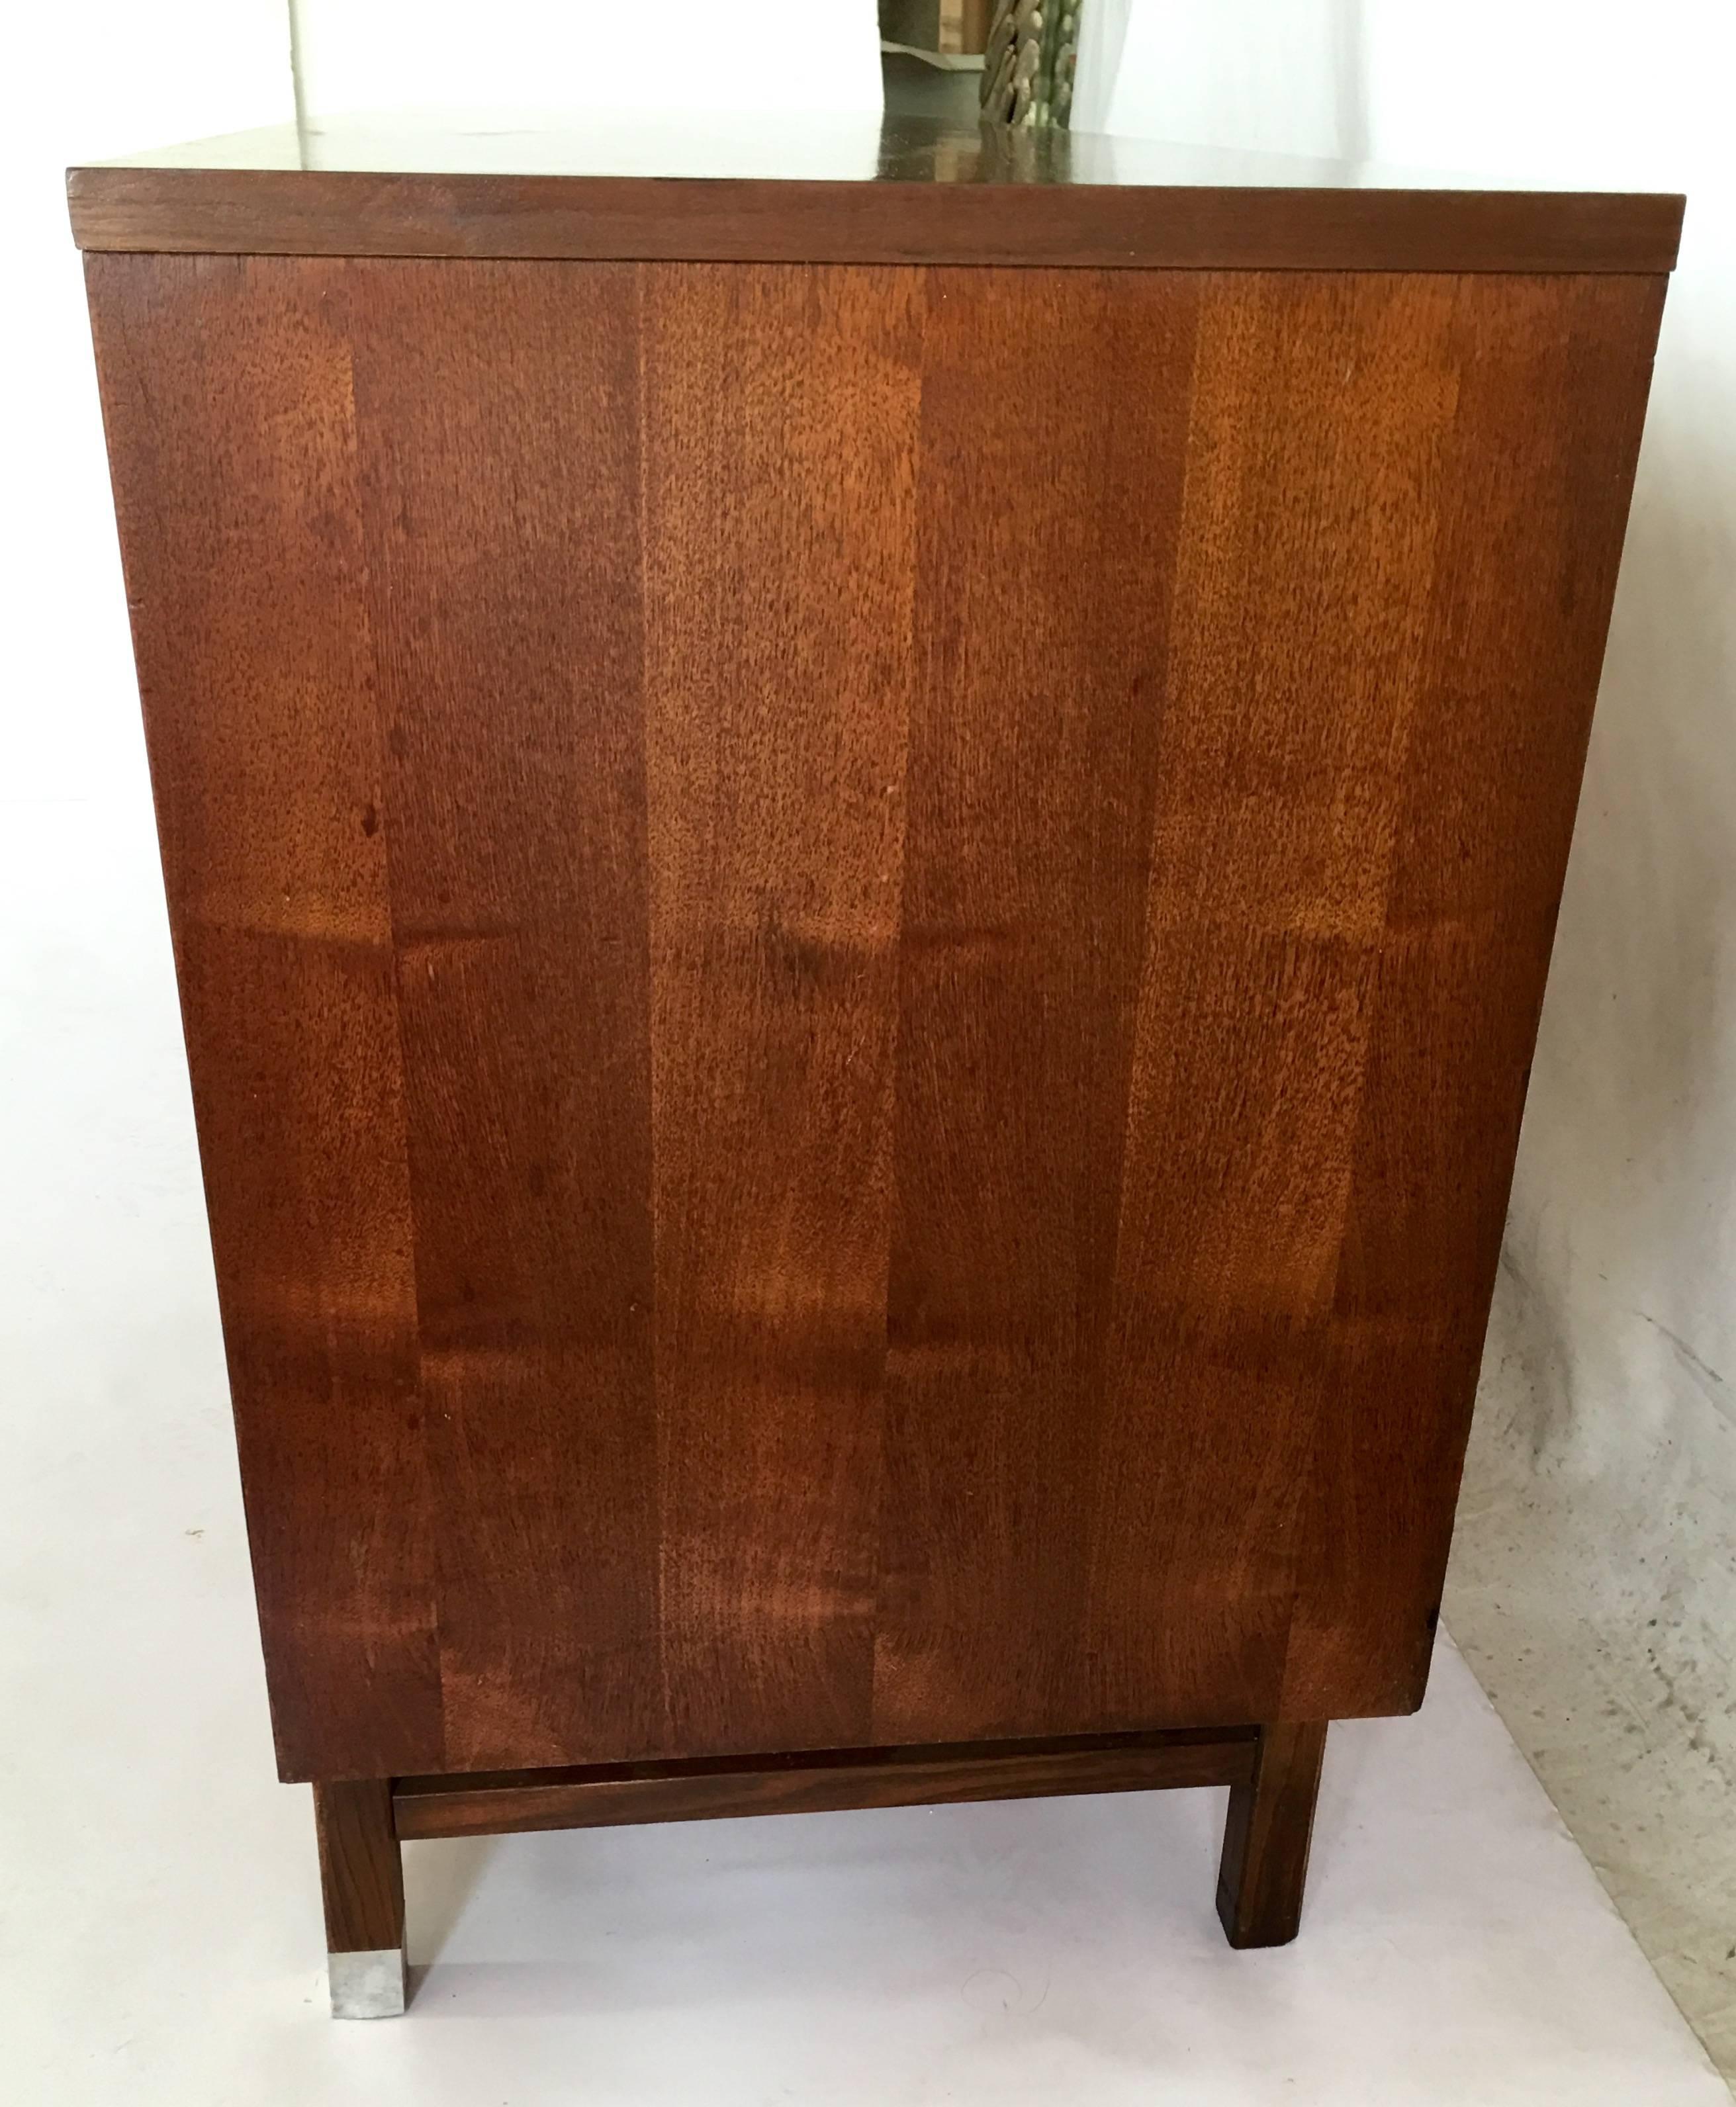 Rosewood Mid-Century Modern Inlay Sideboard by Stanley